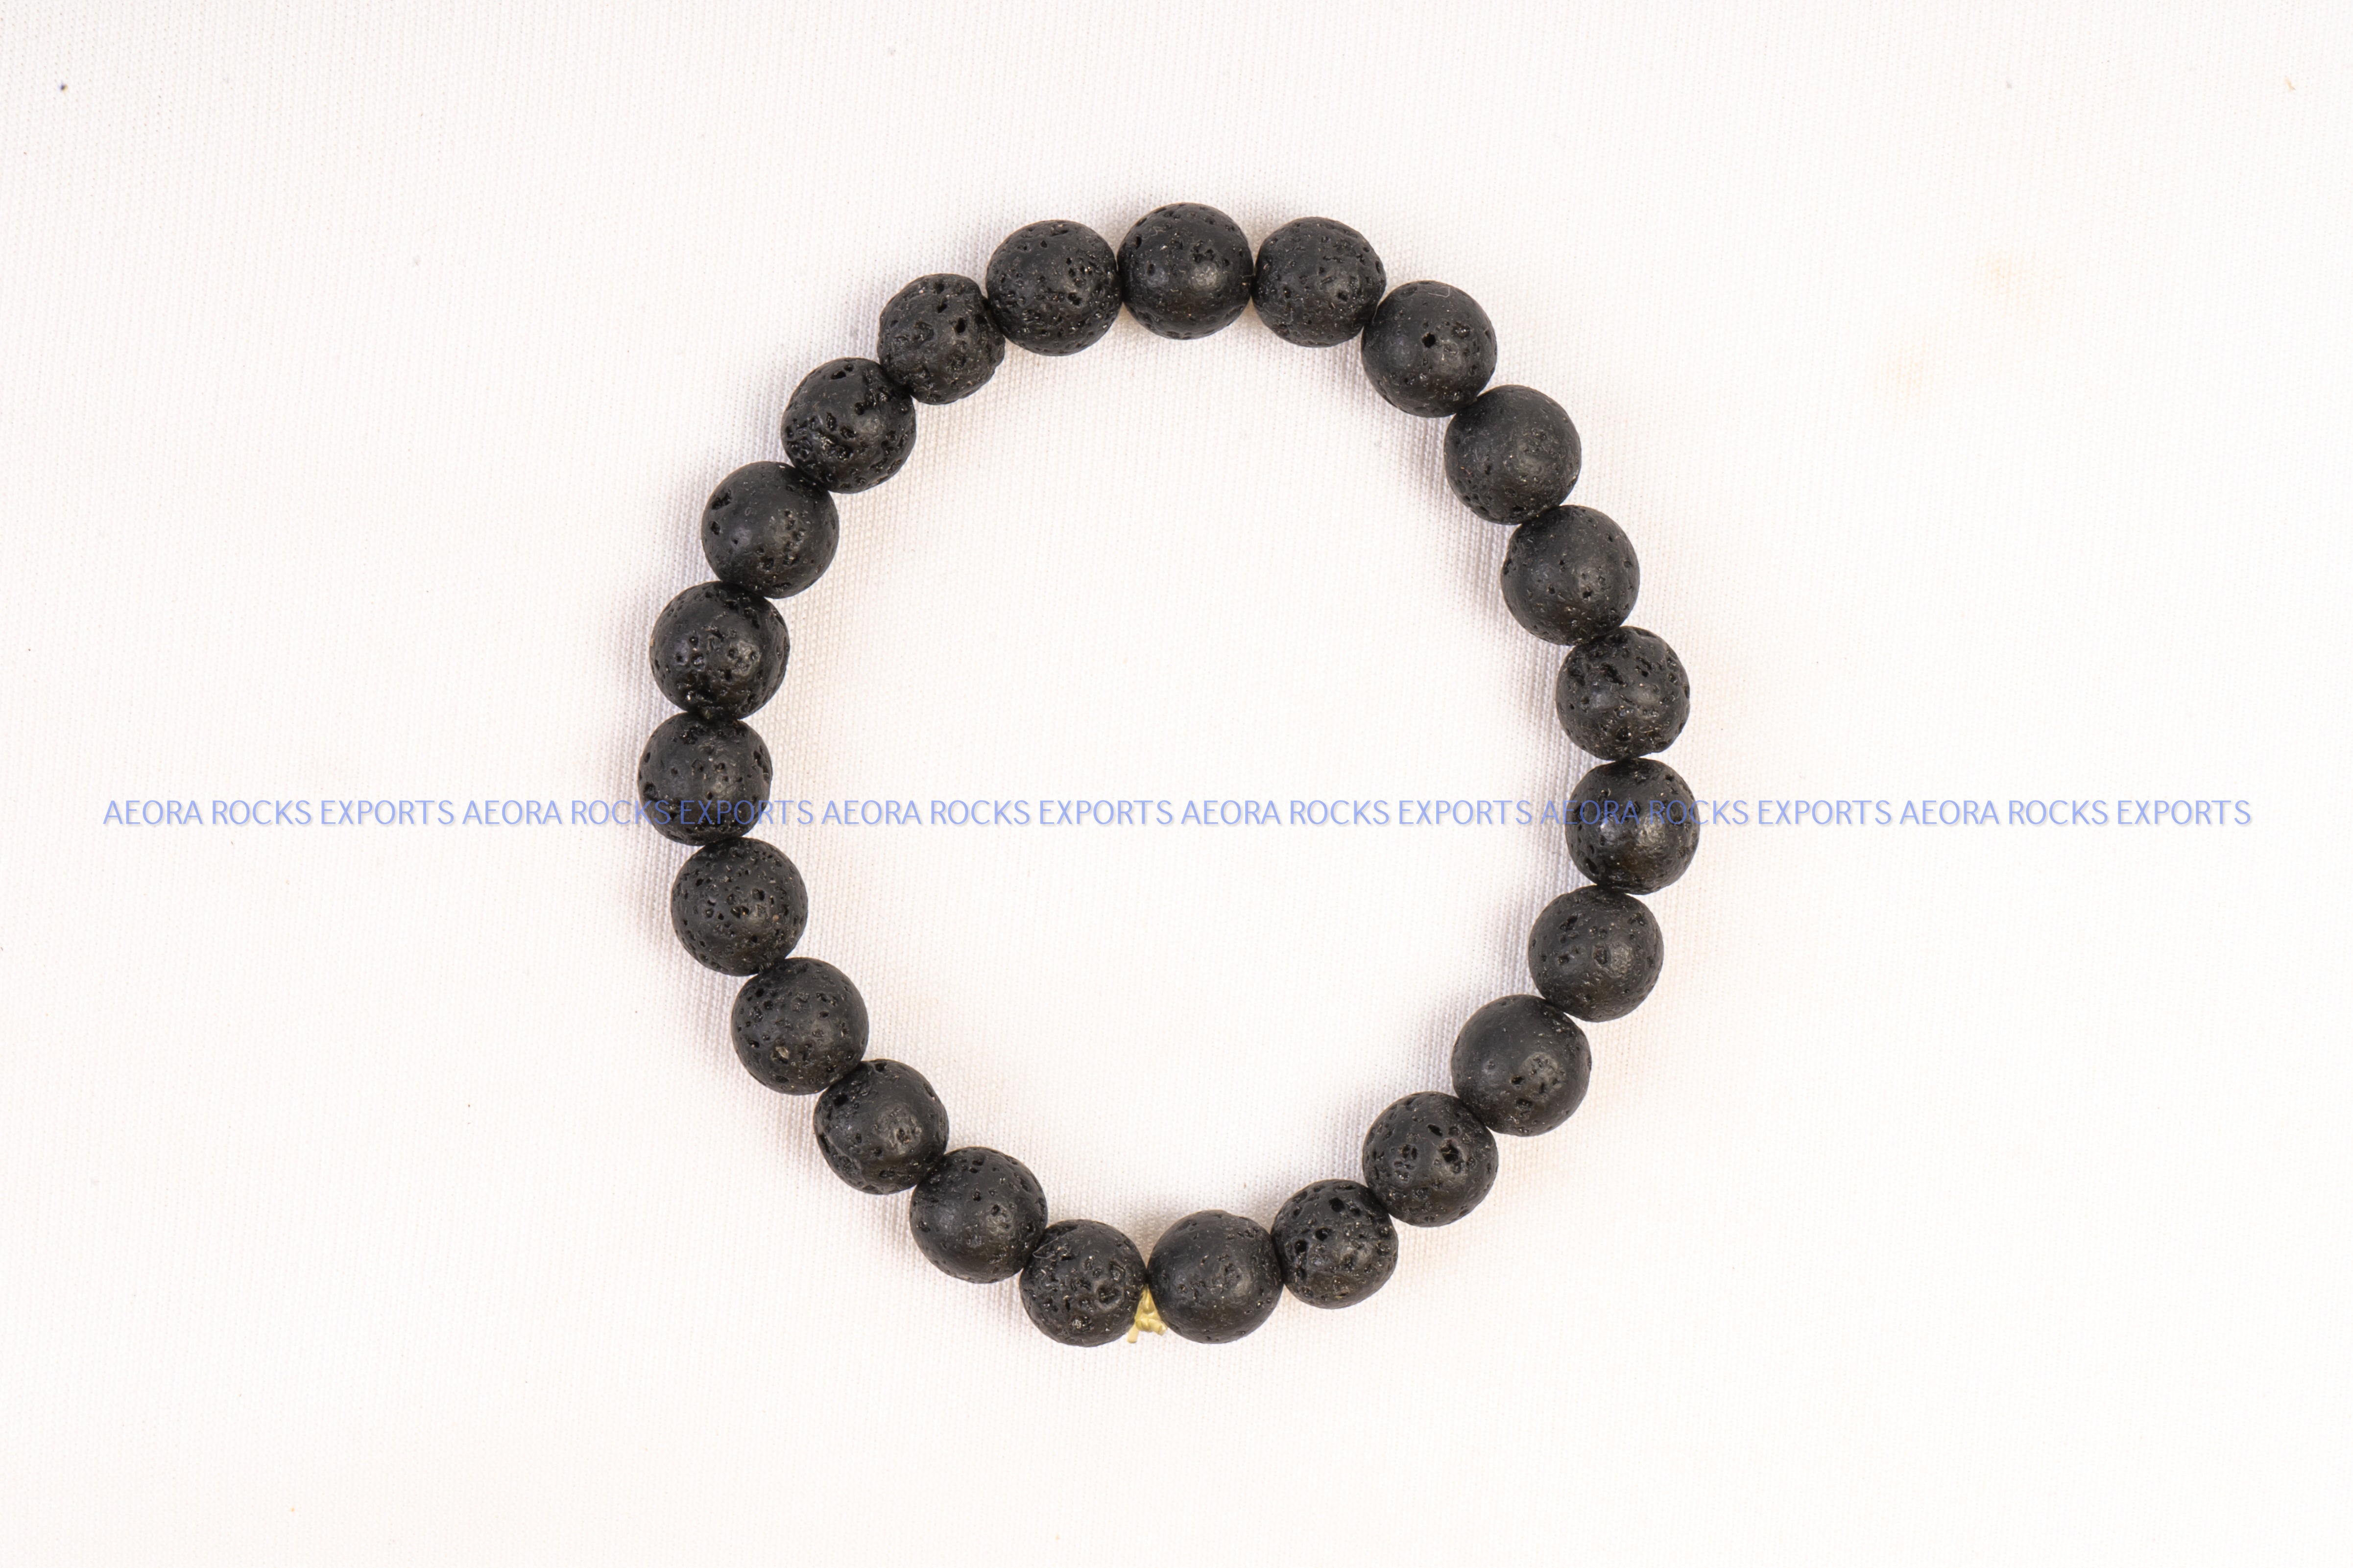 Buy CONGRATULATIONS lava stone bracelet for men and women(Natural lava  stone, free size, Round) at Amazon.in